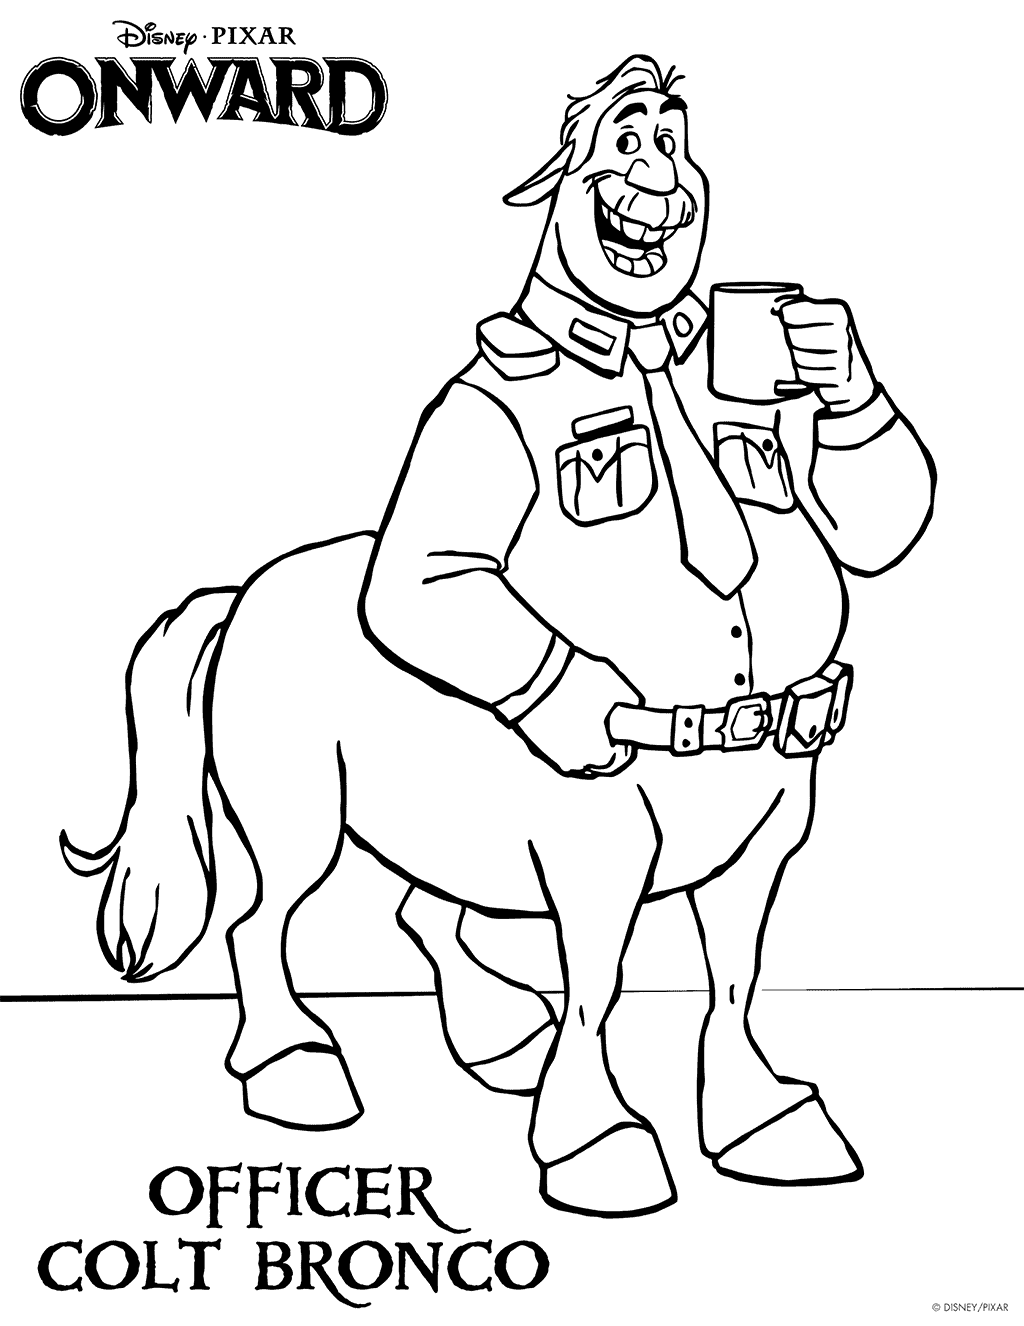 Officer Colt Bronco Coloring Page